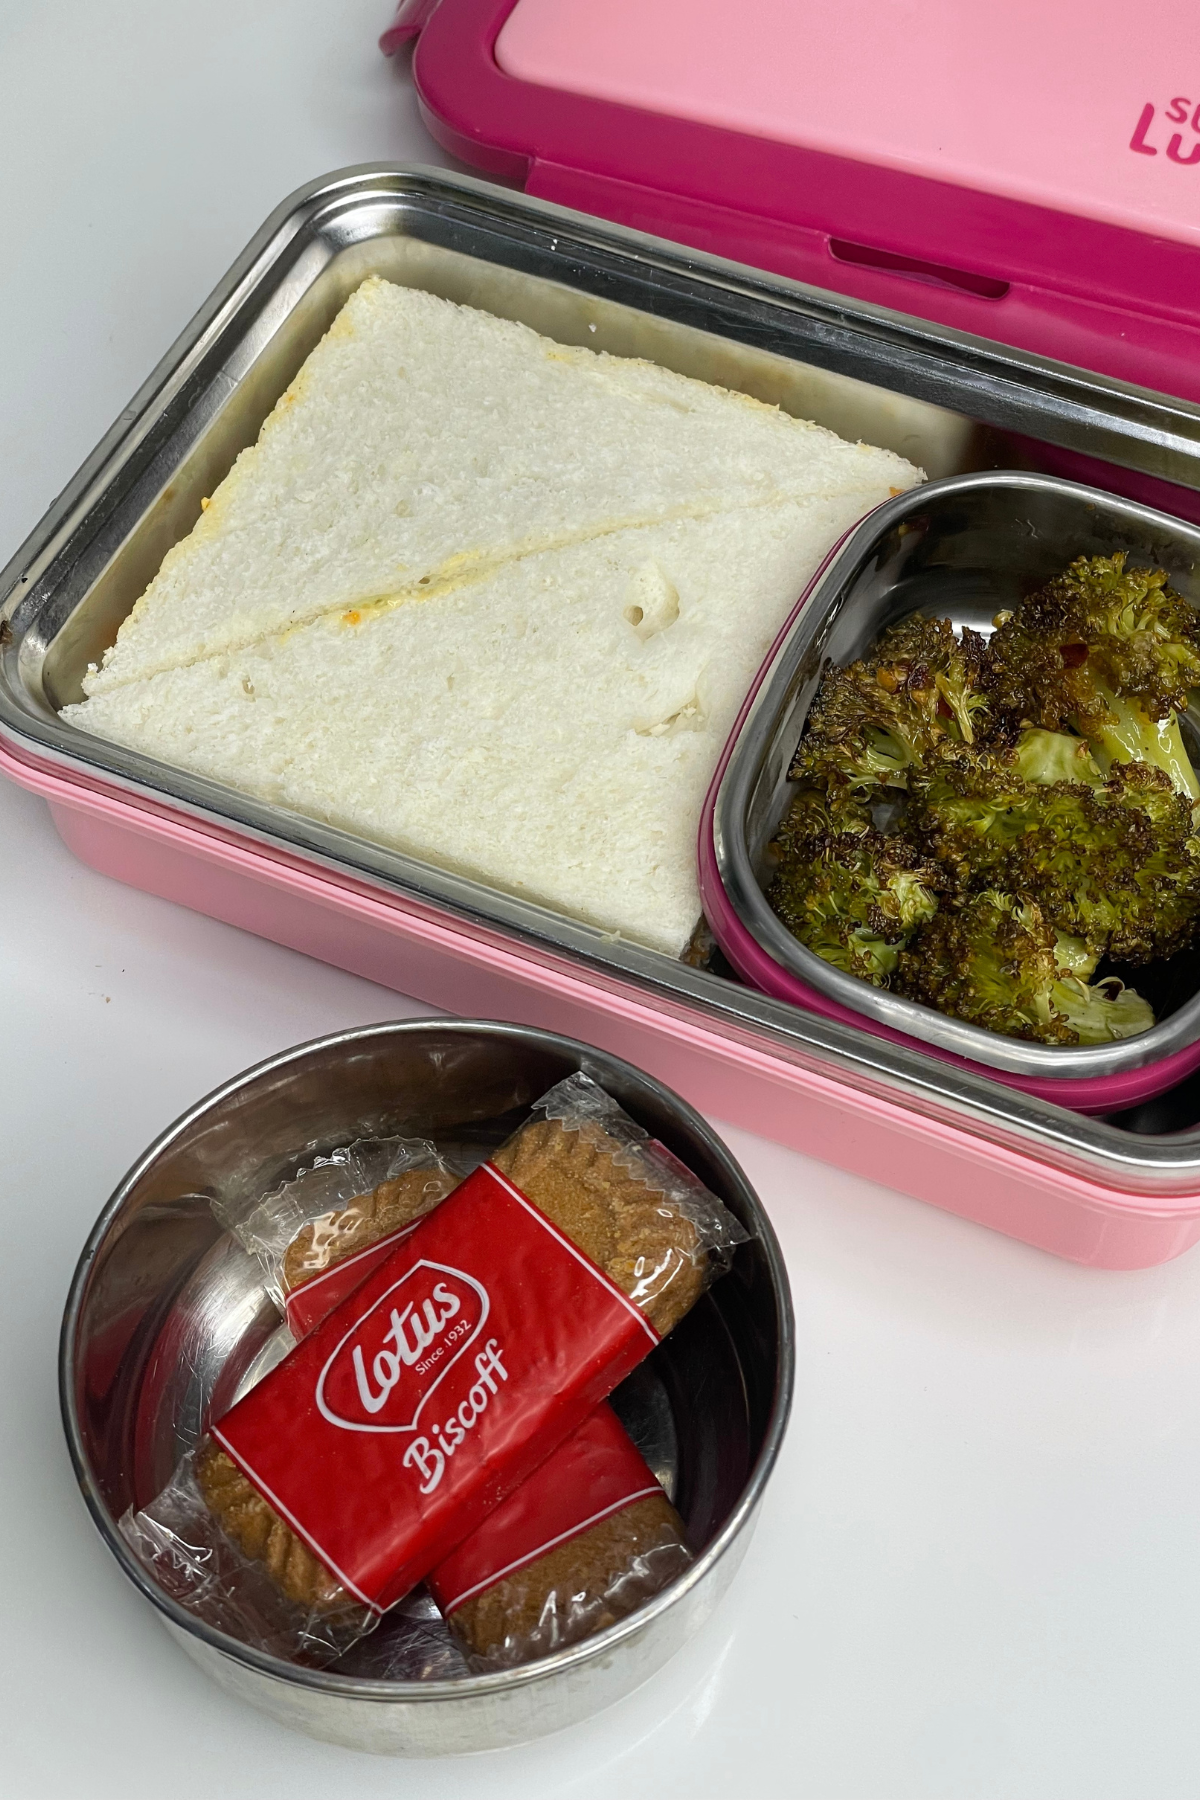 50 Easy Kids Lunch Recipes (for Home and School Lunch)